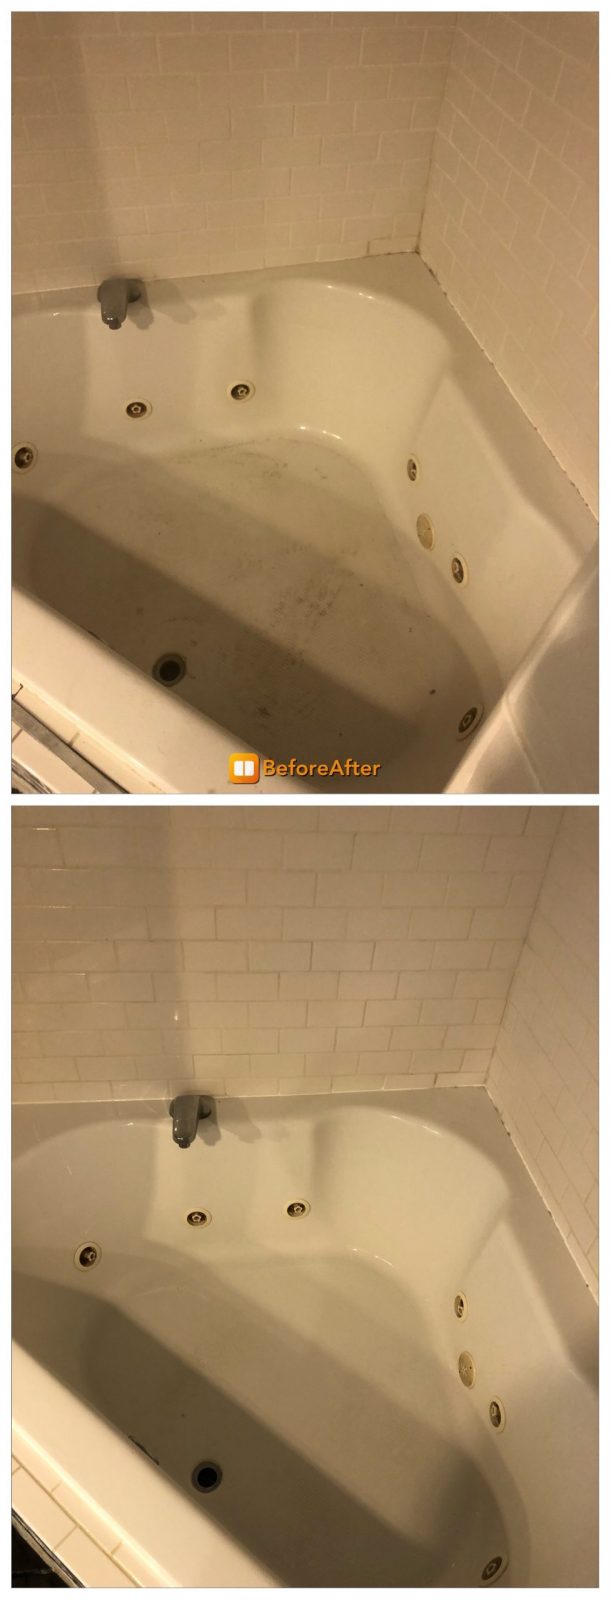 Professional Tile & Grout Cleaning Amberley Ohio by Howards Cleaning Service